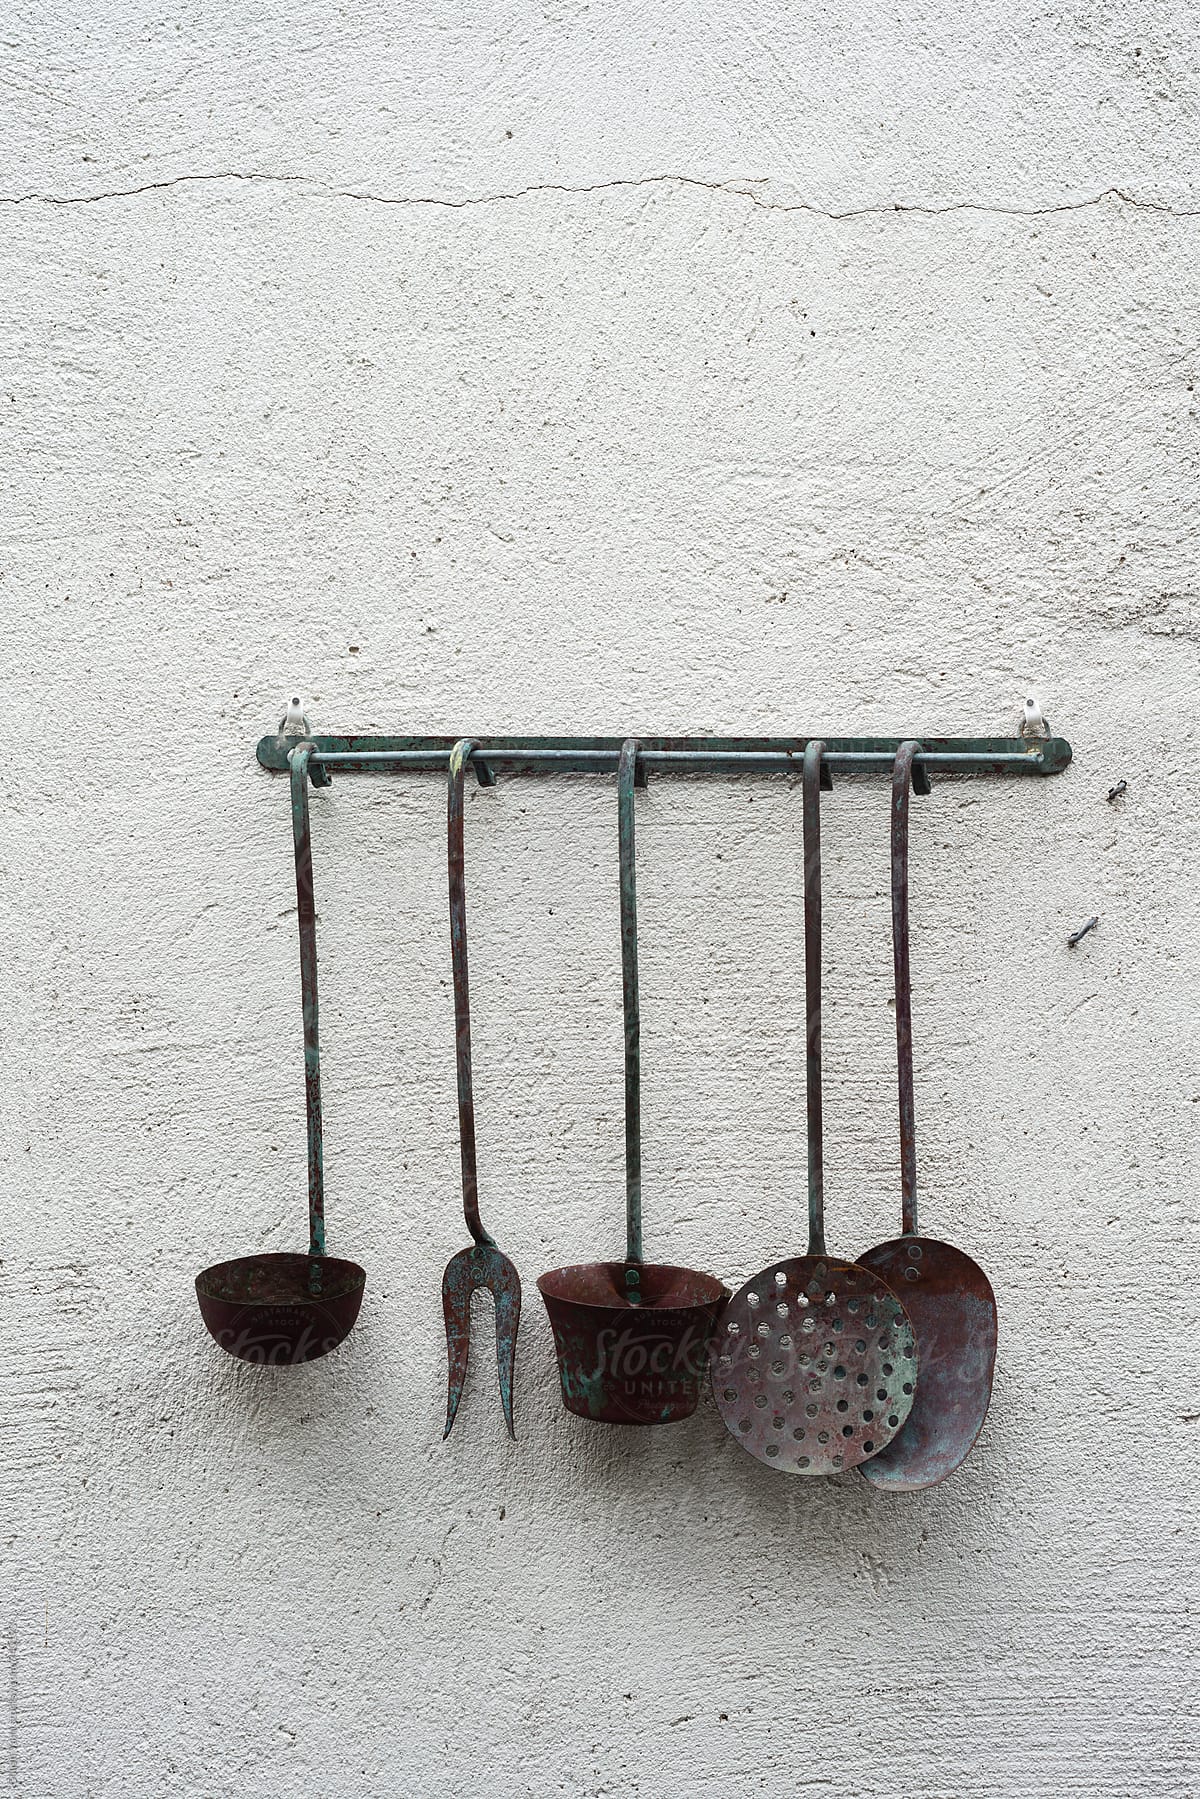 old kitchen utensils on a wall as art